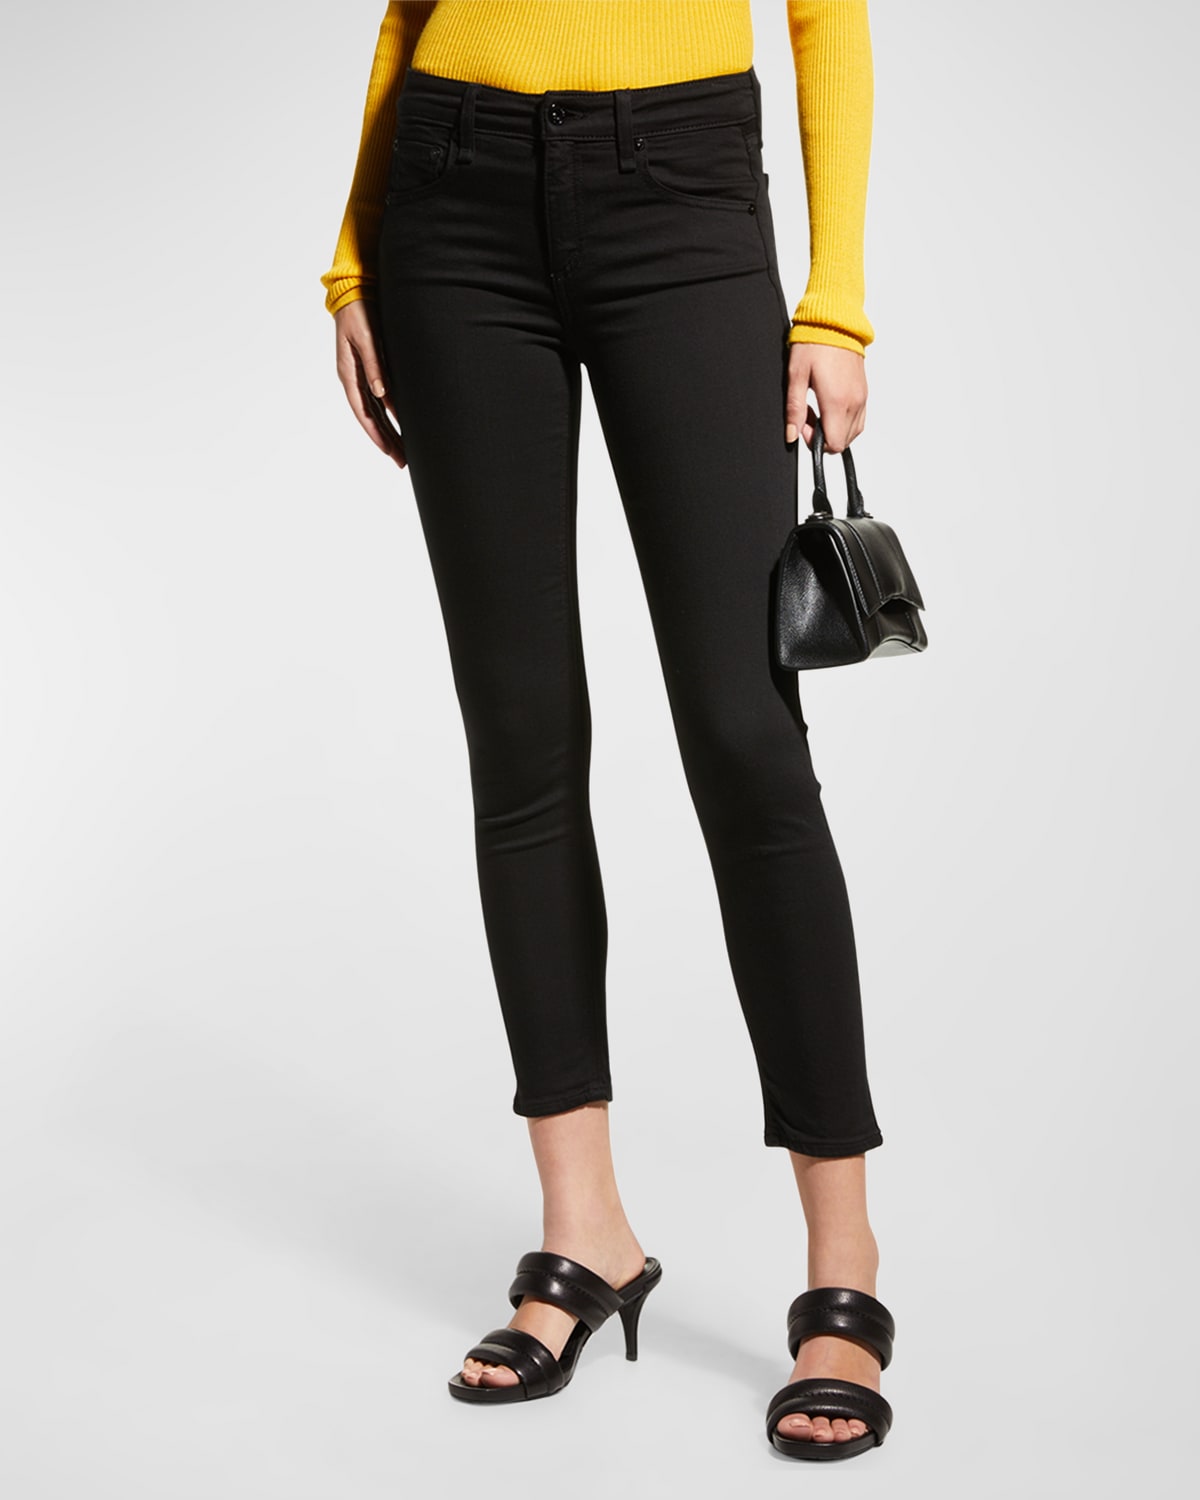 Rag & Bone Cate Mid-Rise Skinny Ankle Jeans | Neiman Marcus